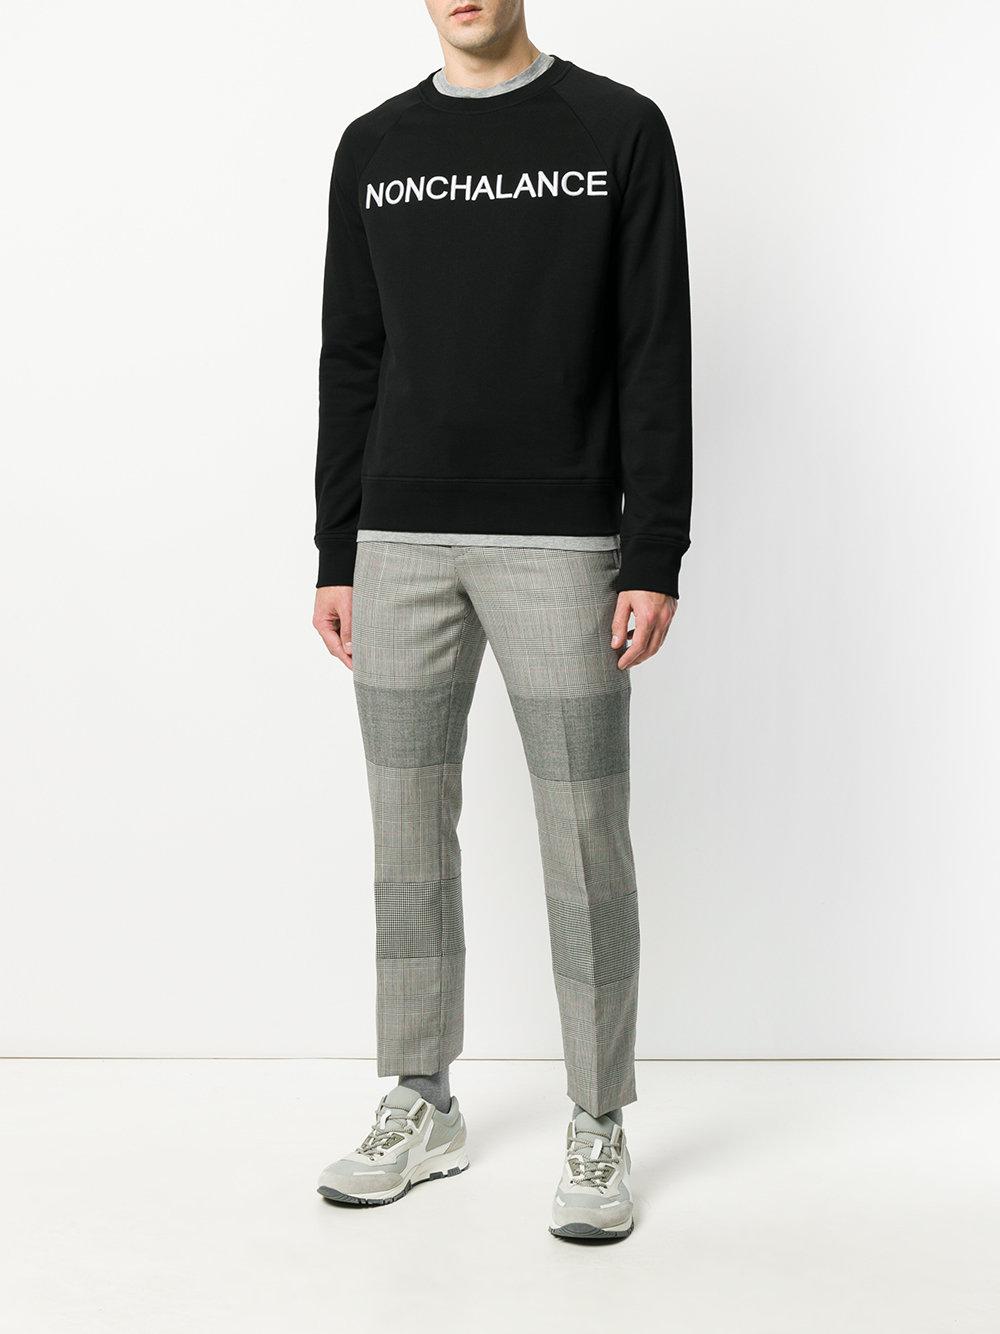 N°21 No21 Nonchalance Embroidered Sweatshirt in Black for Men | Lyst